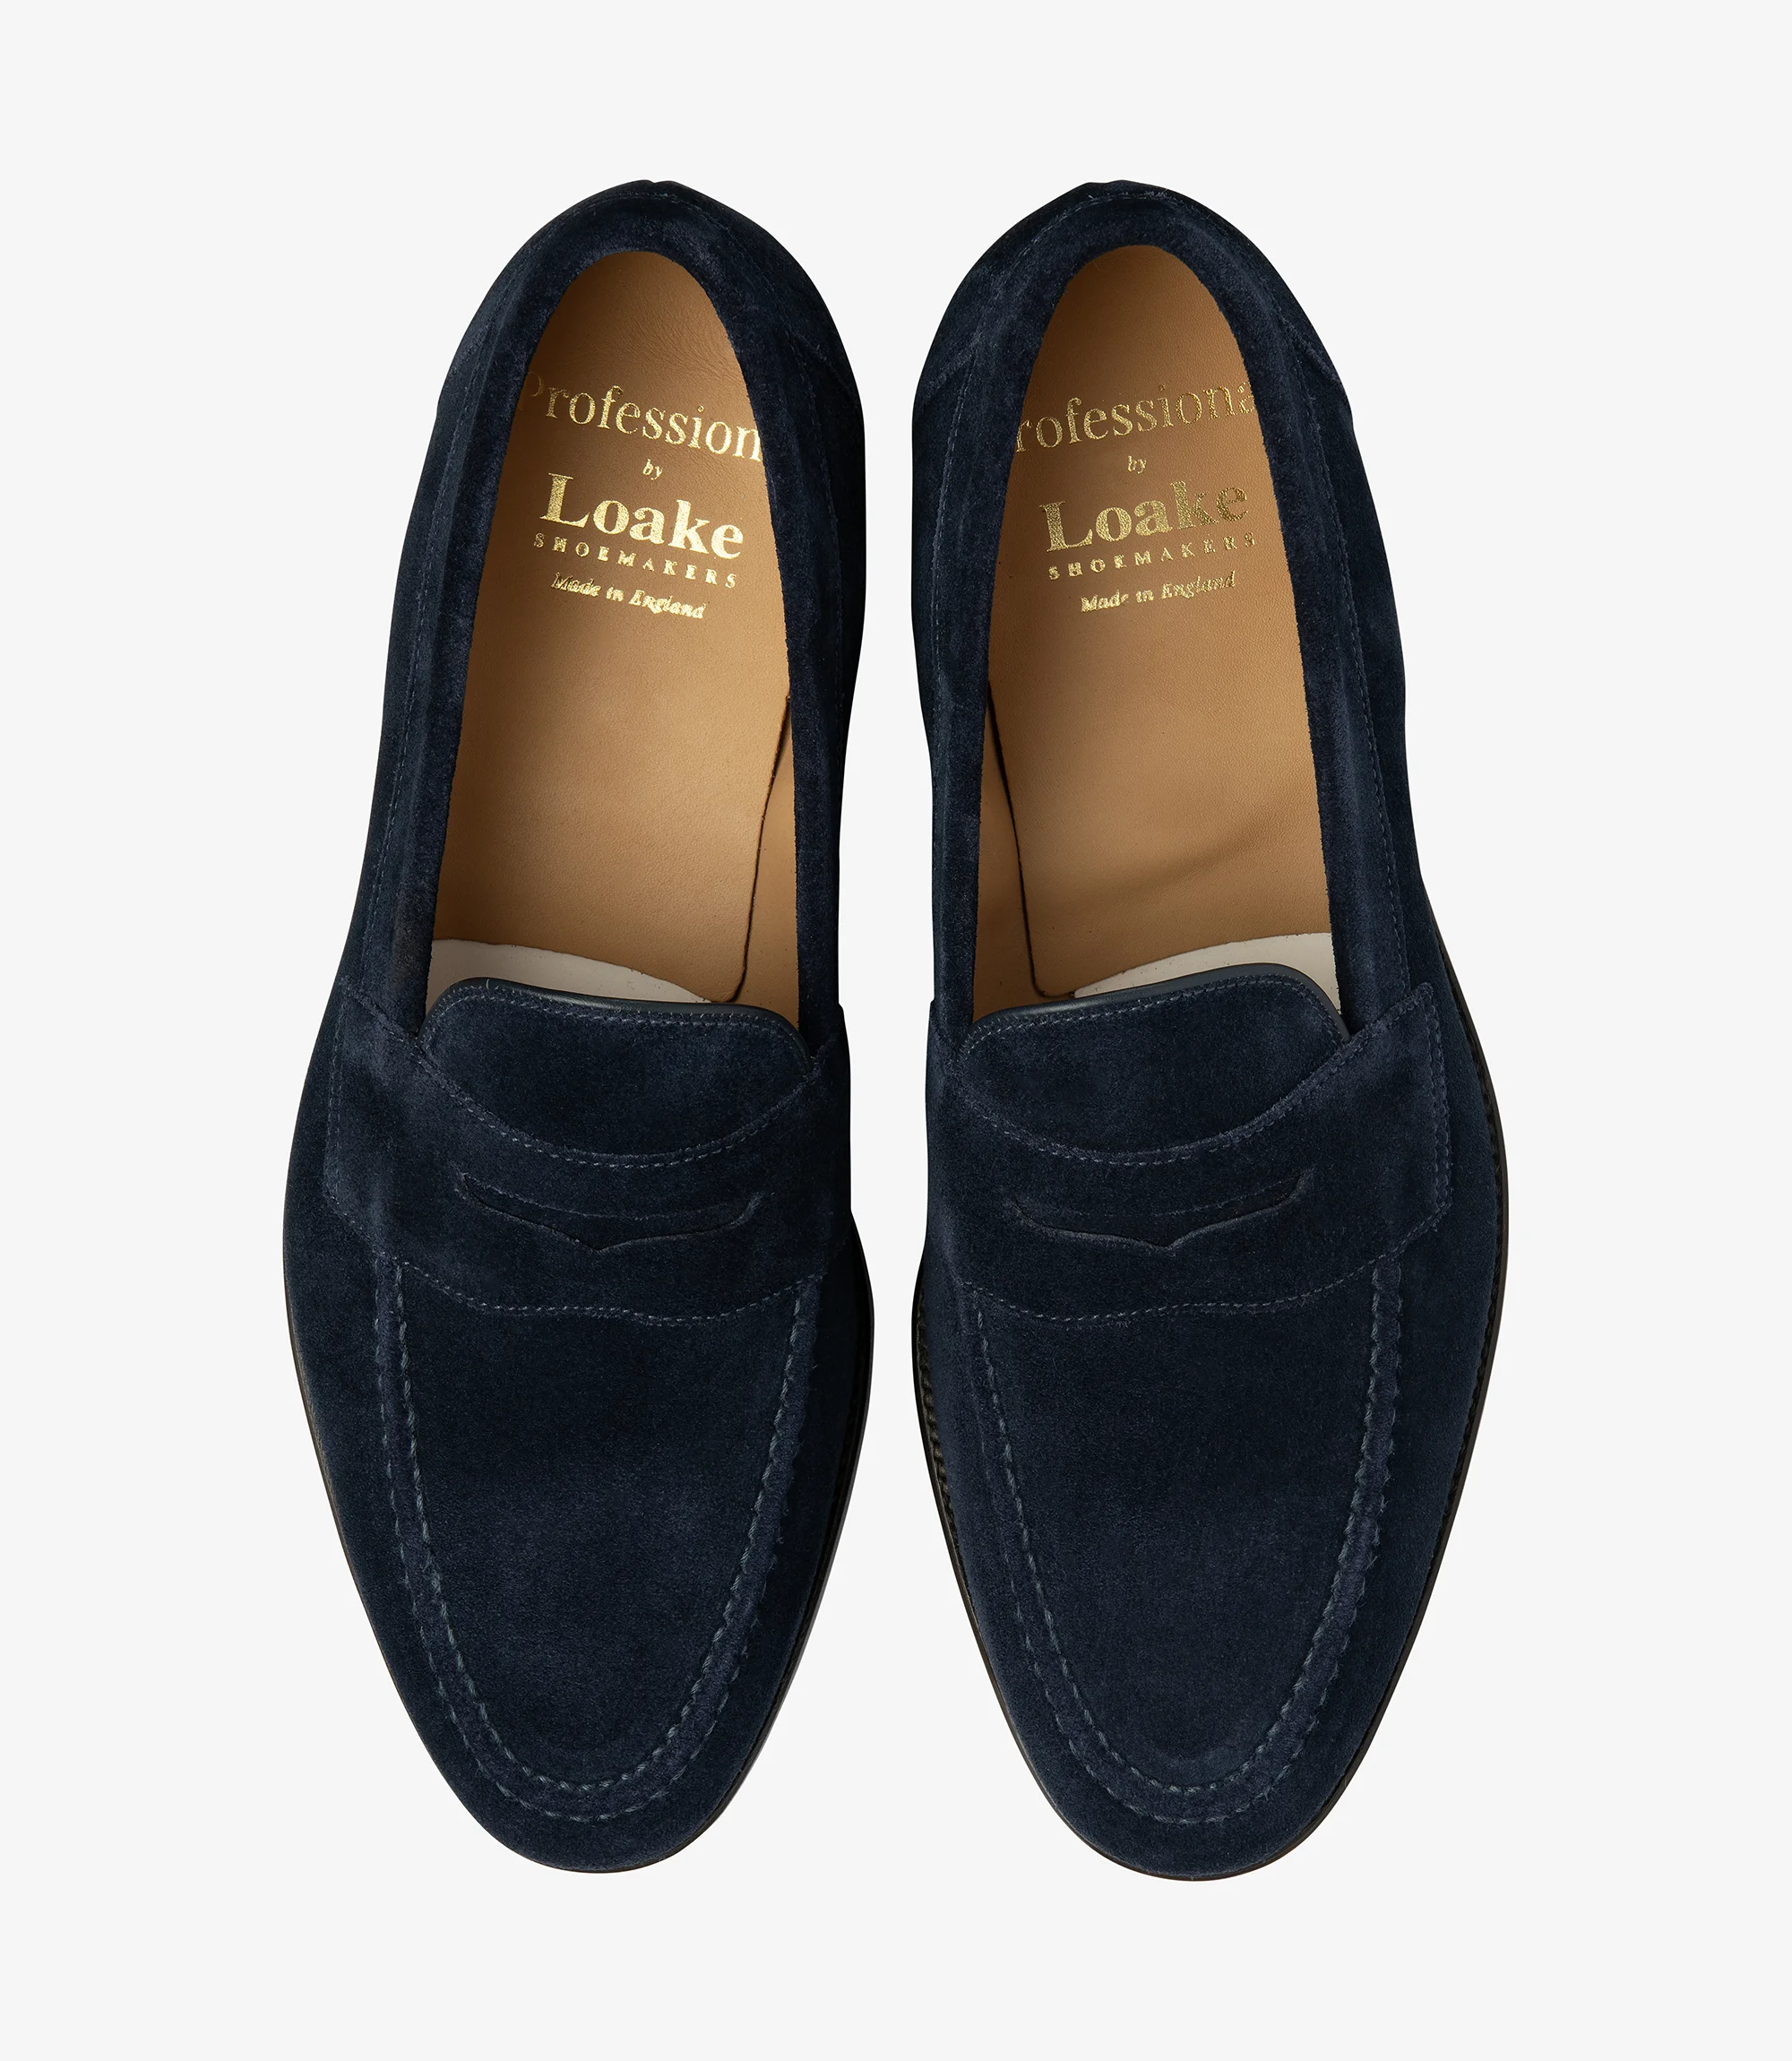 Imperial Loafer | English Men's Shoes & Boots | Loake Shoemakers